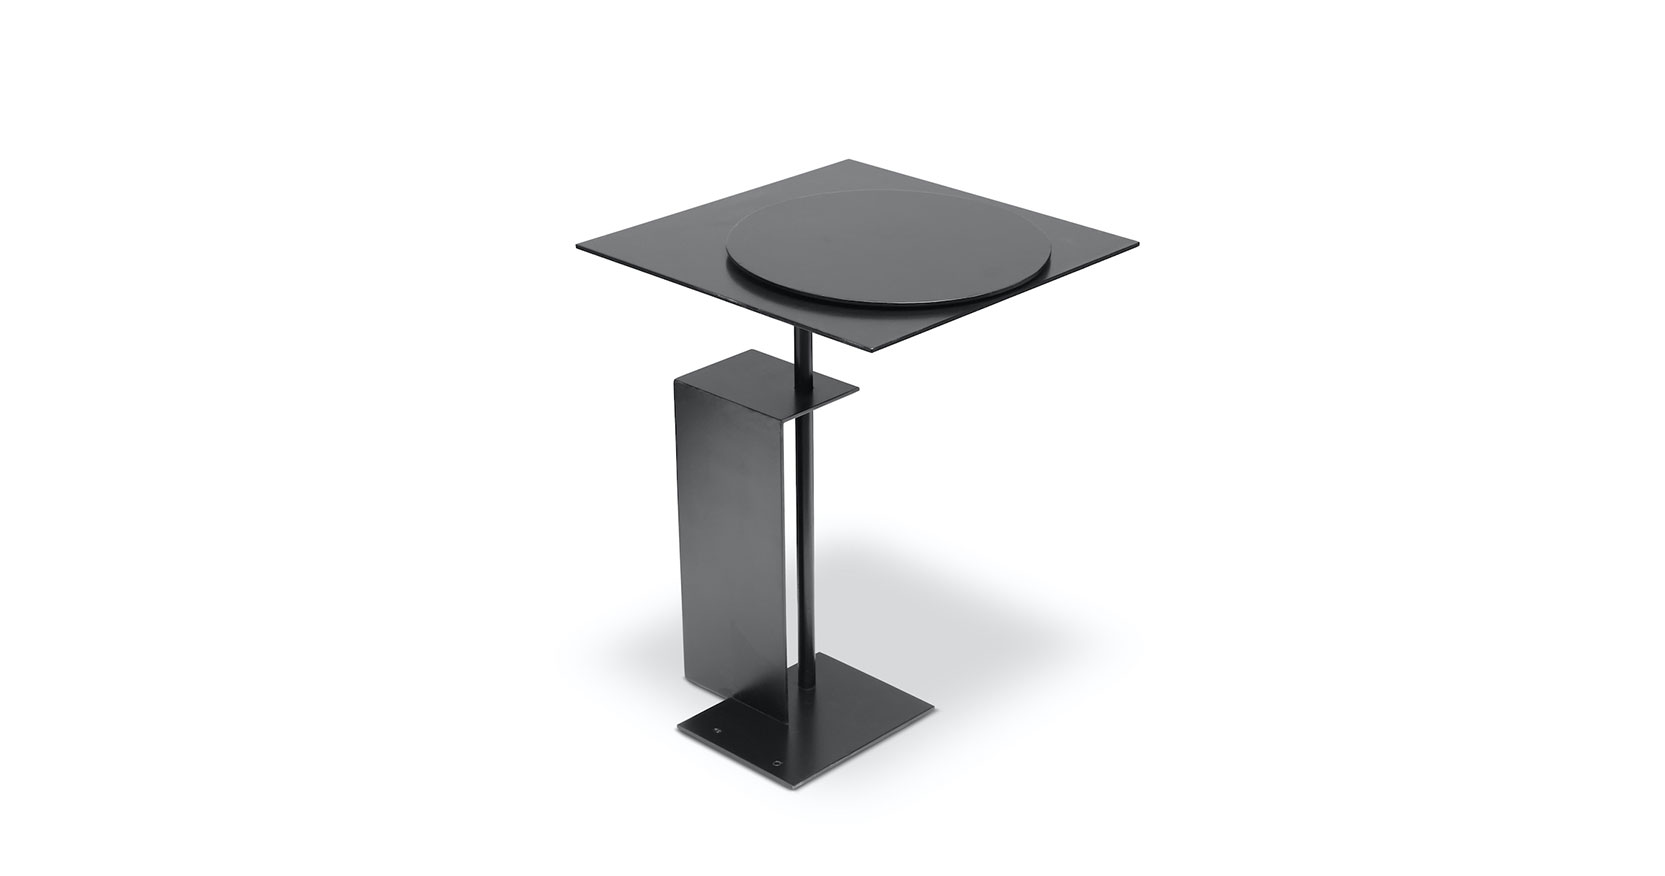 Eric Schmitt, small geometric architectural table in folded black metal, top with a round pivoting top on the square, rectangular base